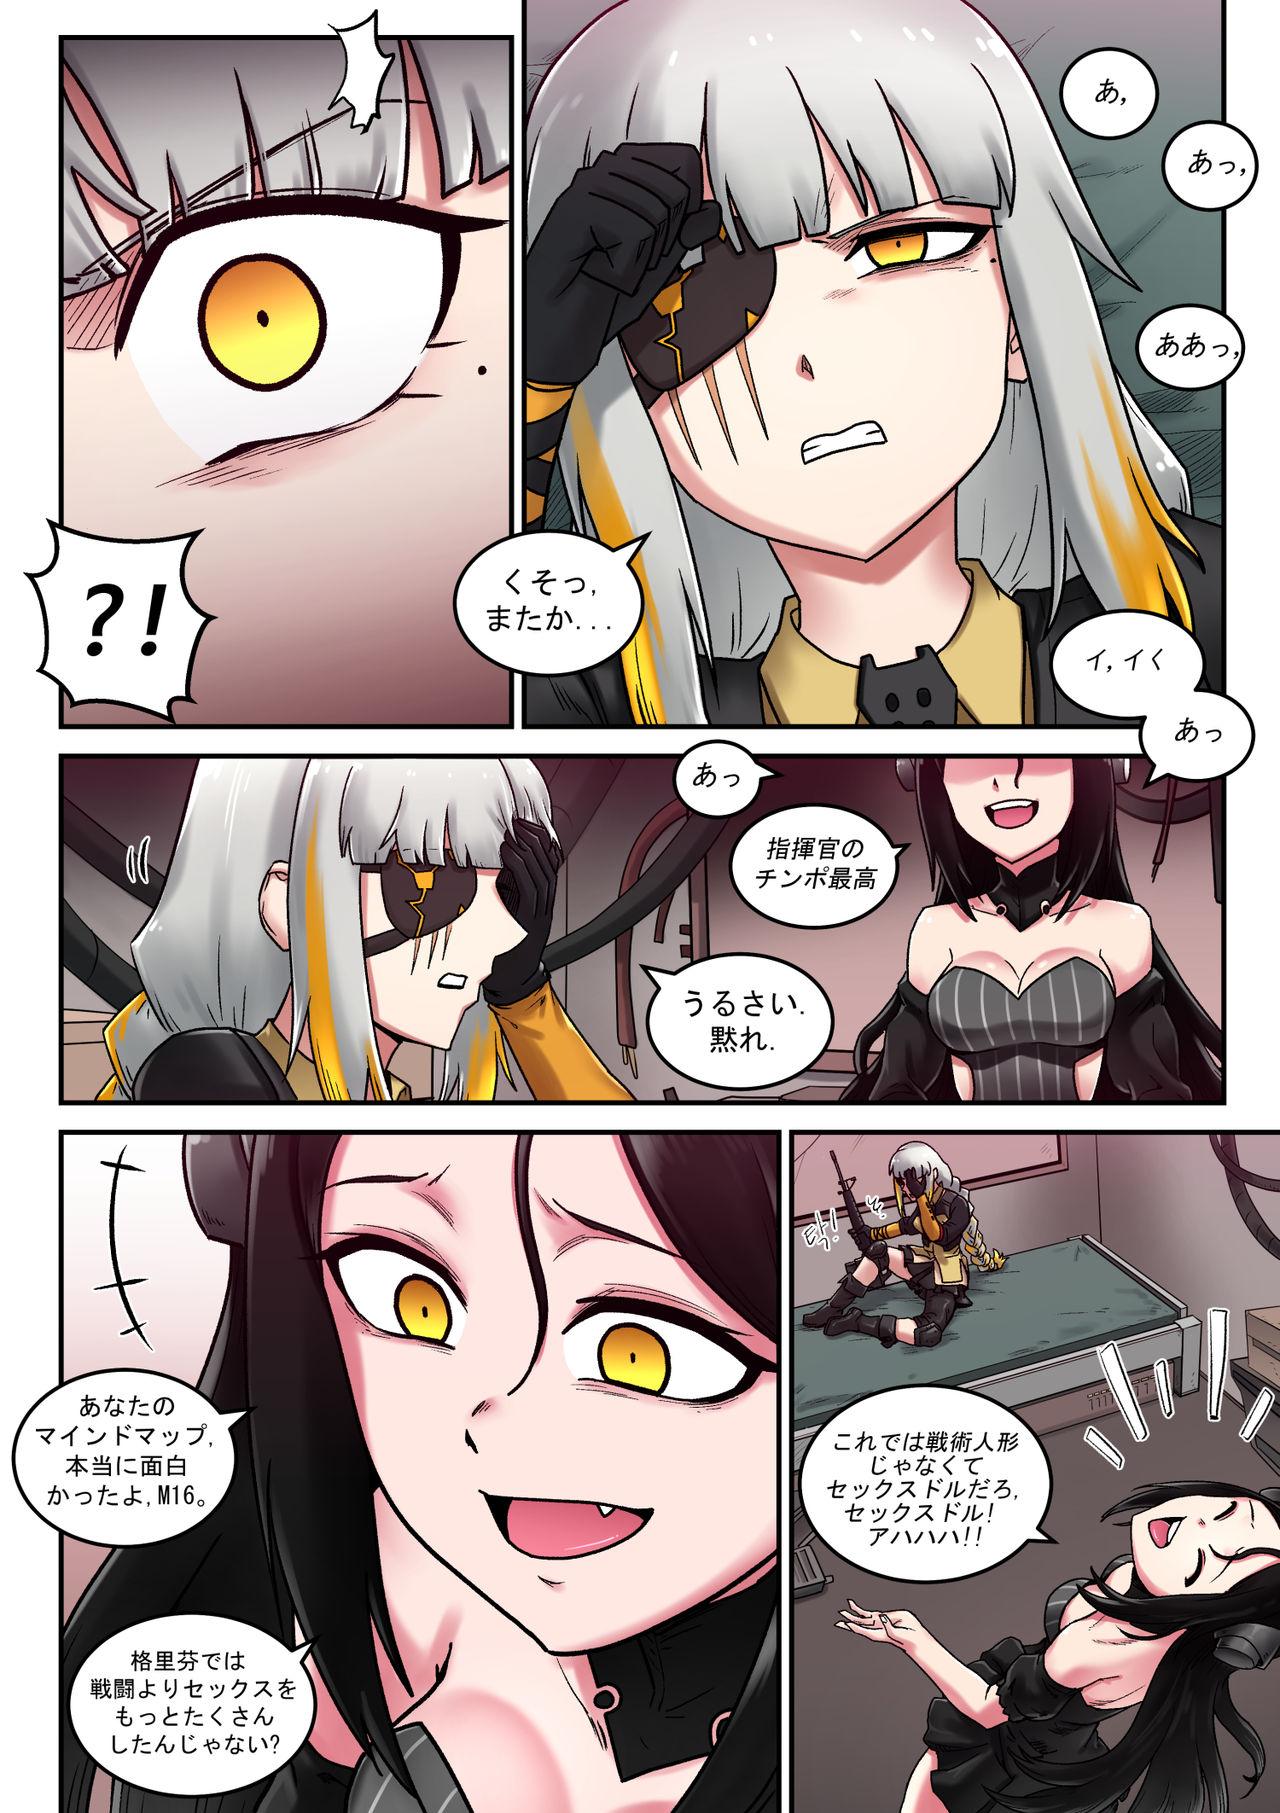 Cheating M16 COMIC - Girls frontline Fucking - Page 12